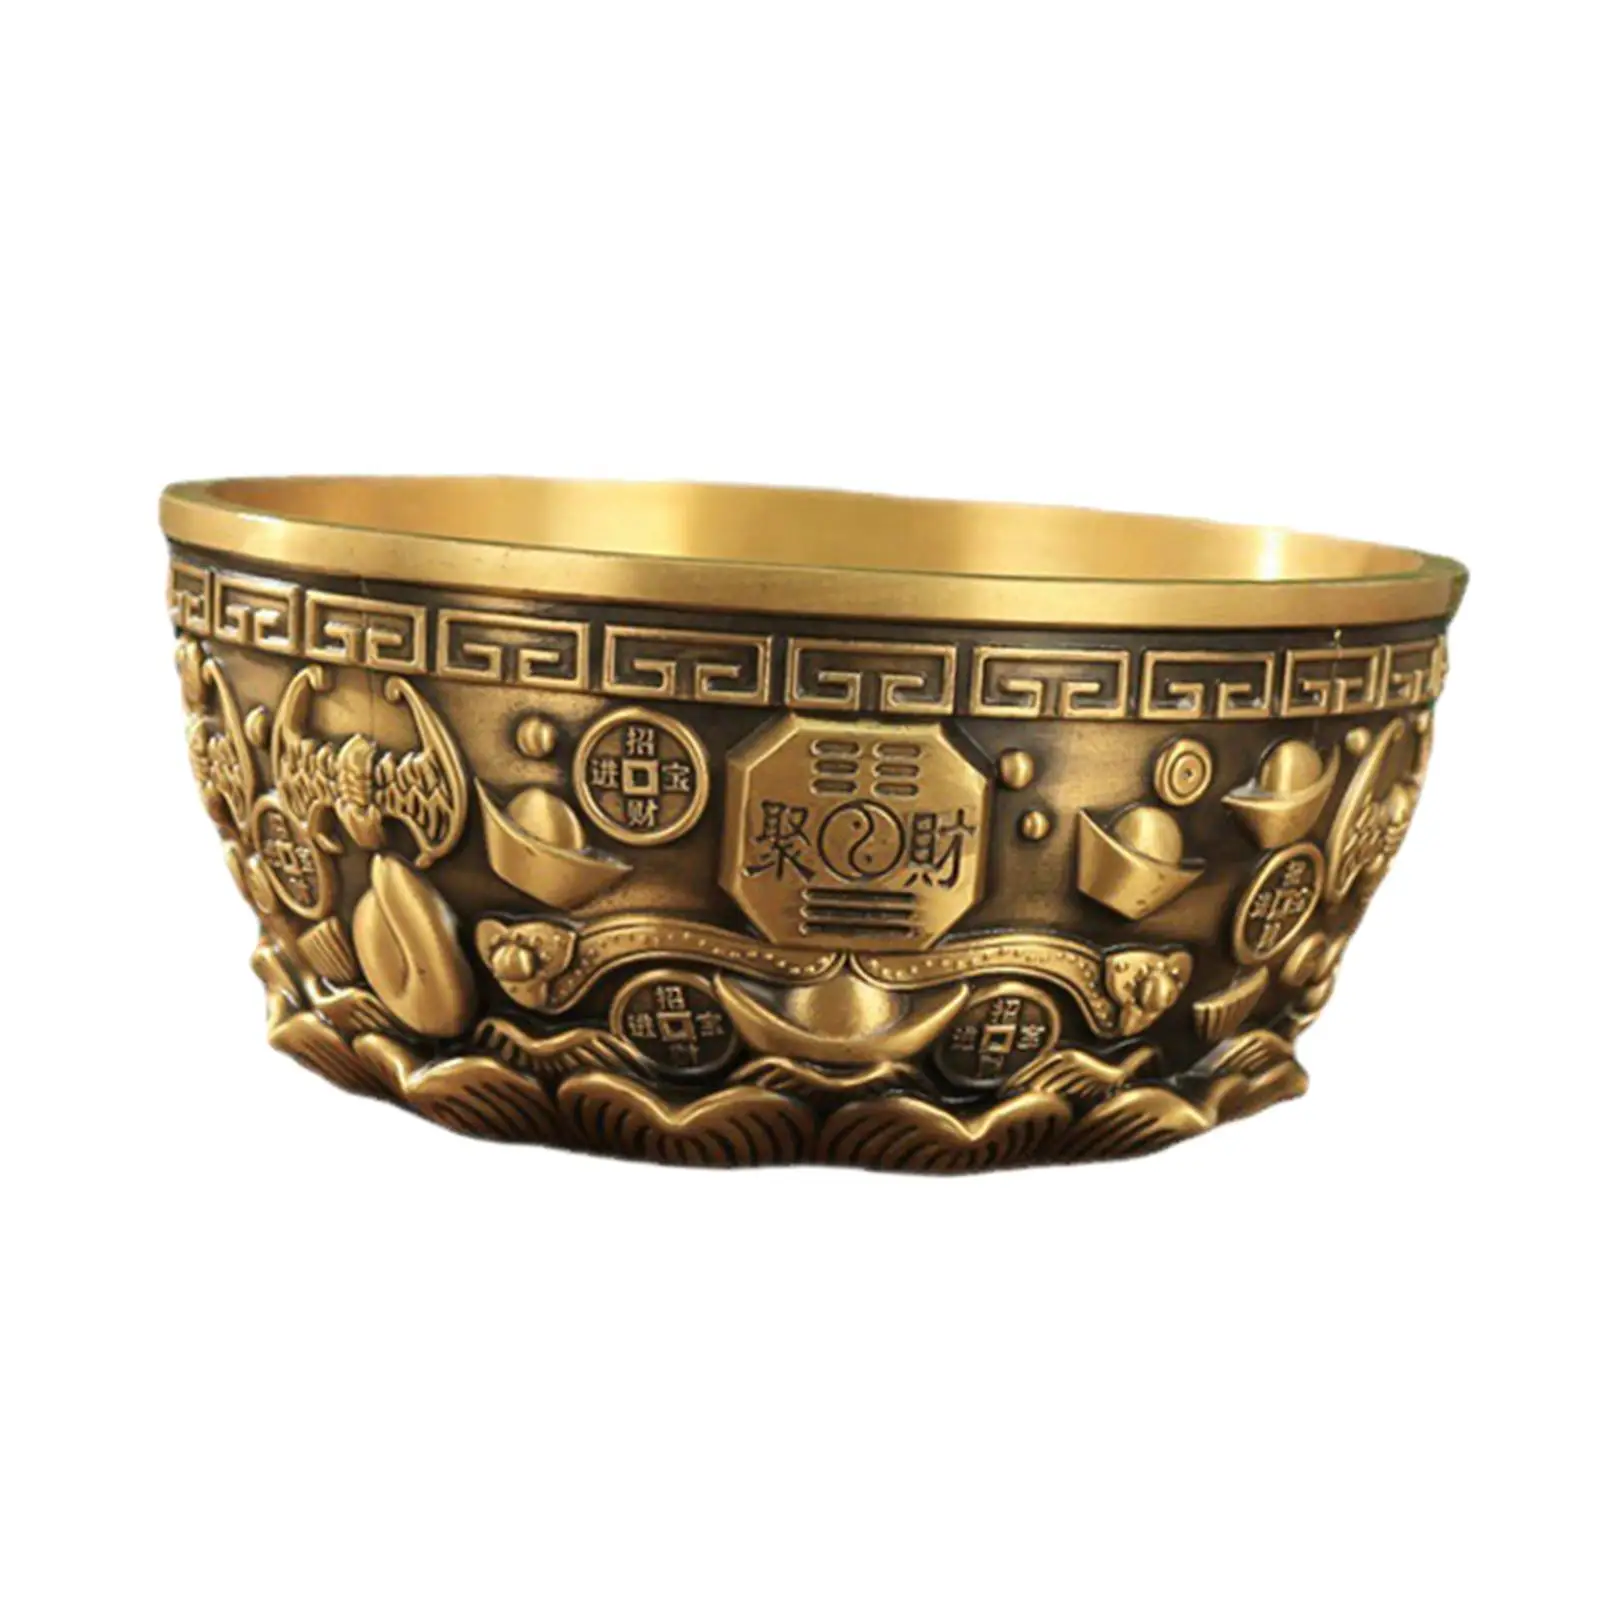 Feng Shui Treasure Basin Craft Collectible for Office Success Decorations